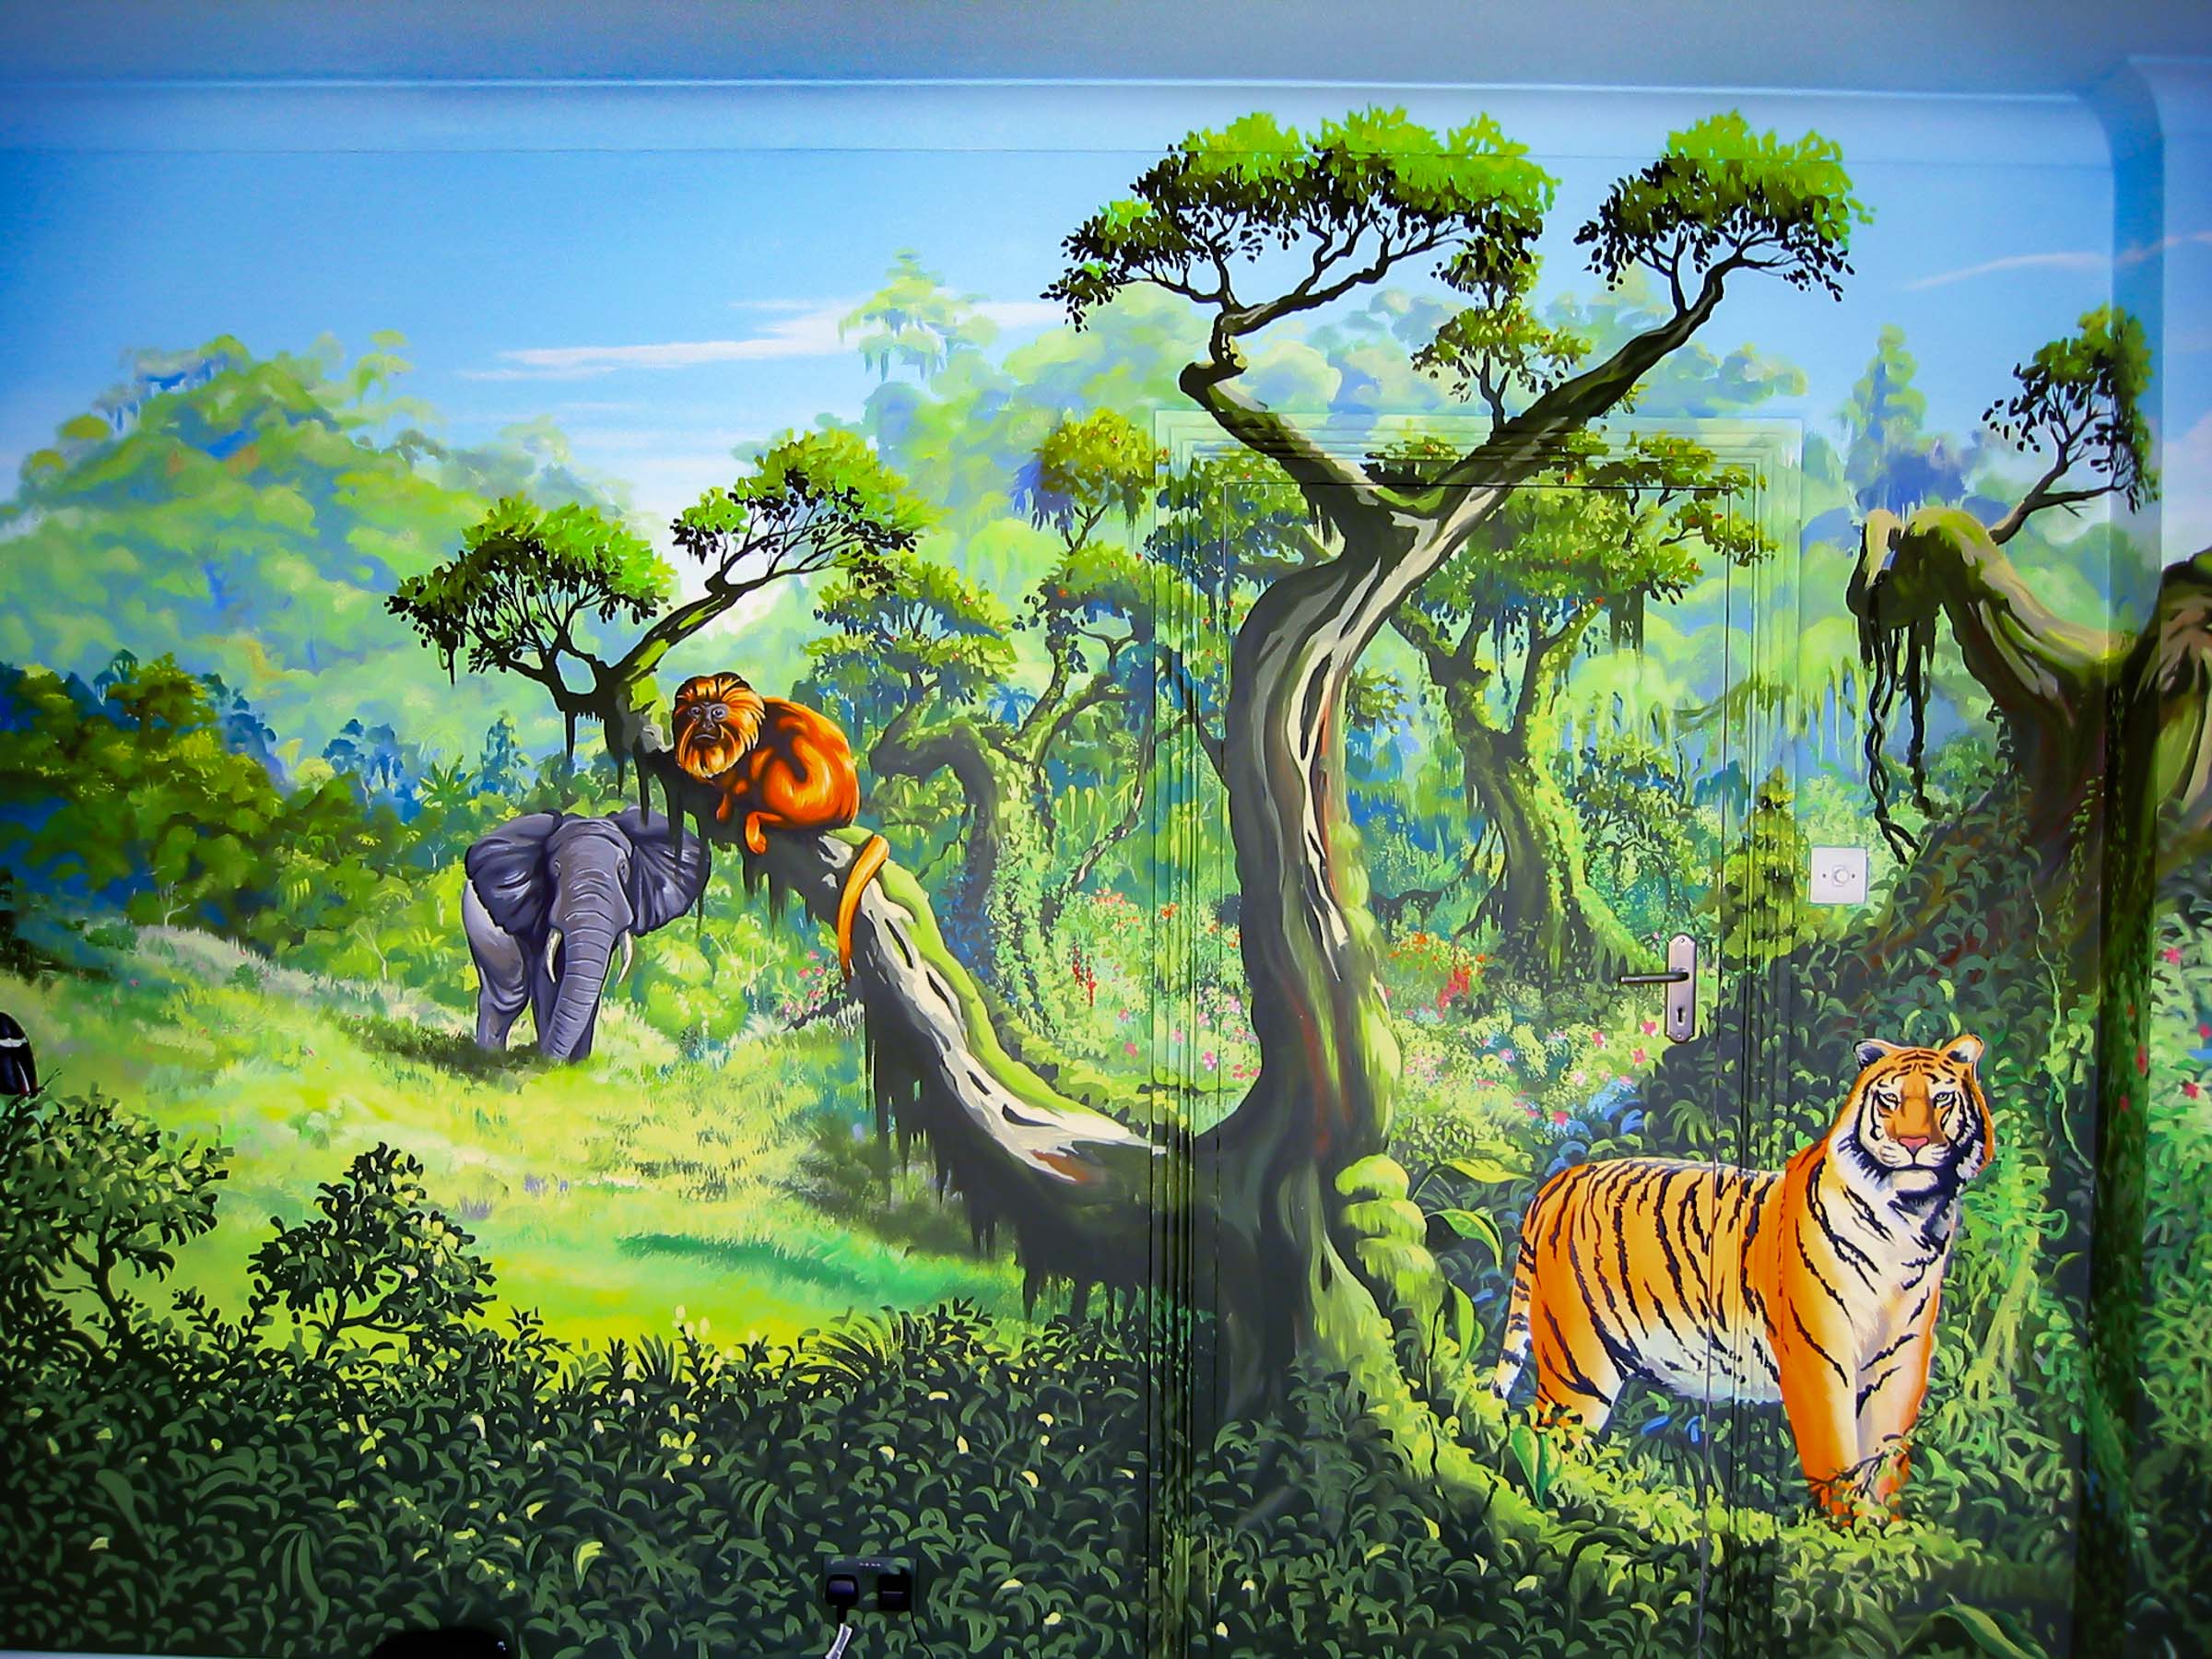 Jungle mural wall opposite the window, with dense jungle, elephant, tiger and golden tamerind